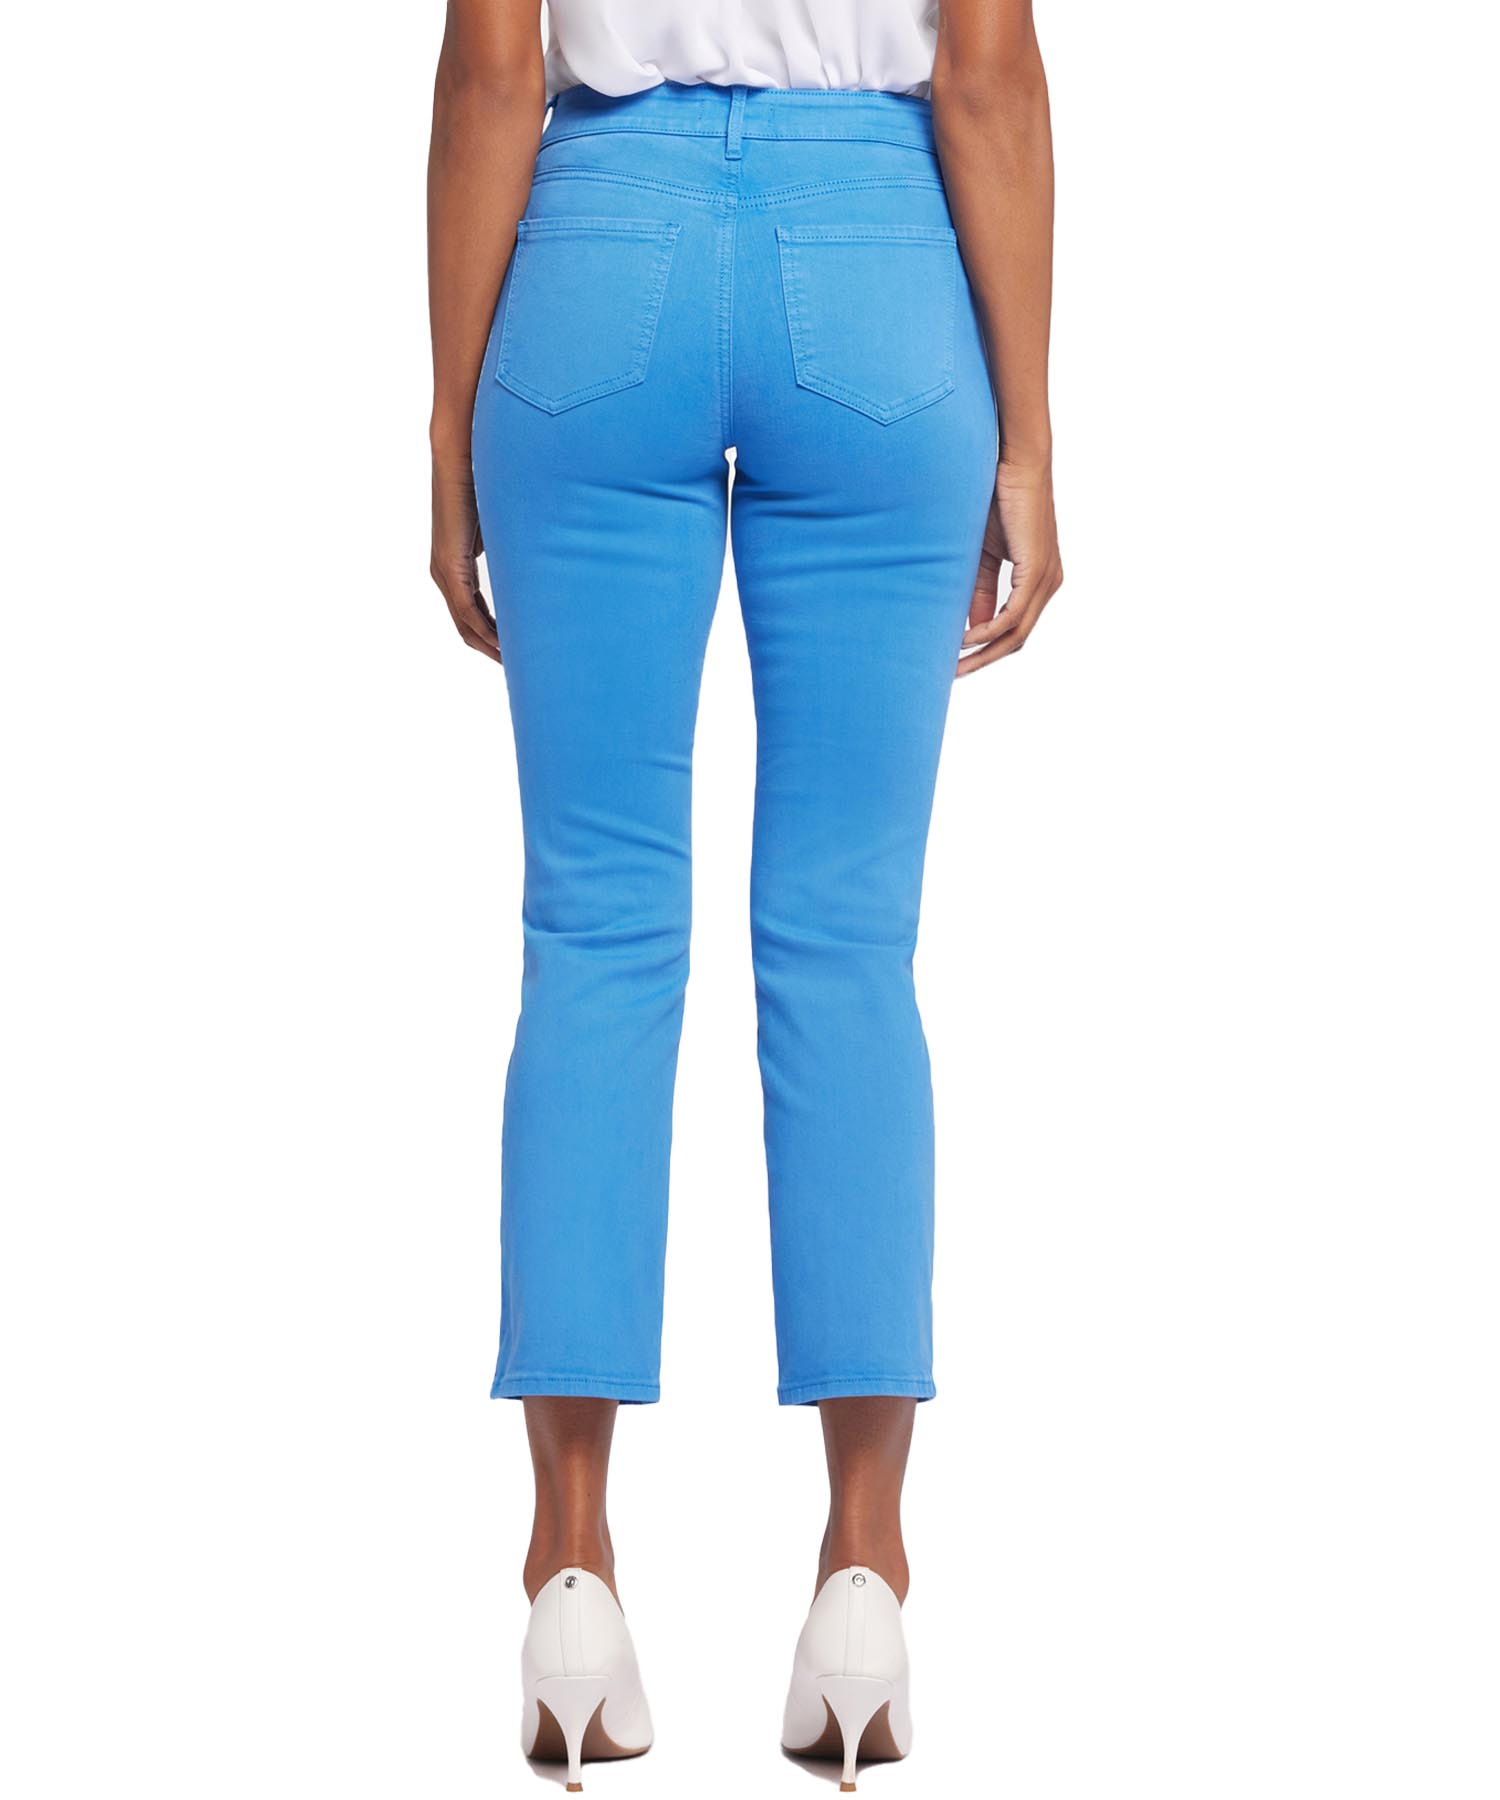 NYDJ Jeans Marilyn Straight Ankle